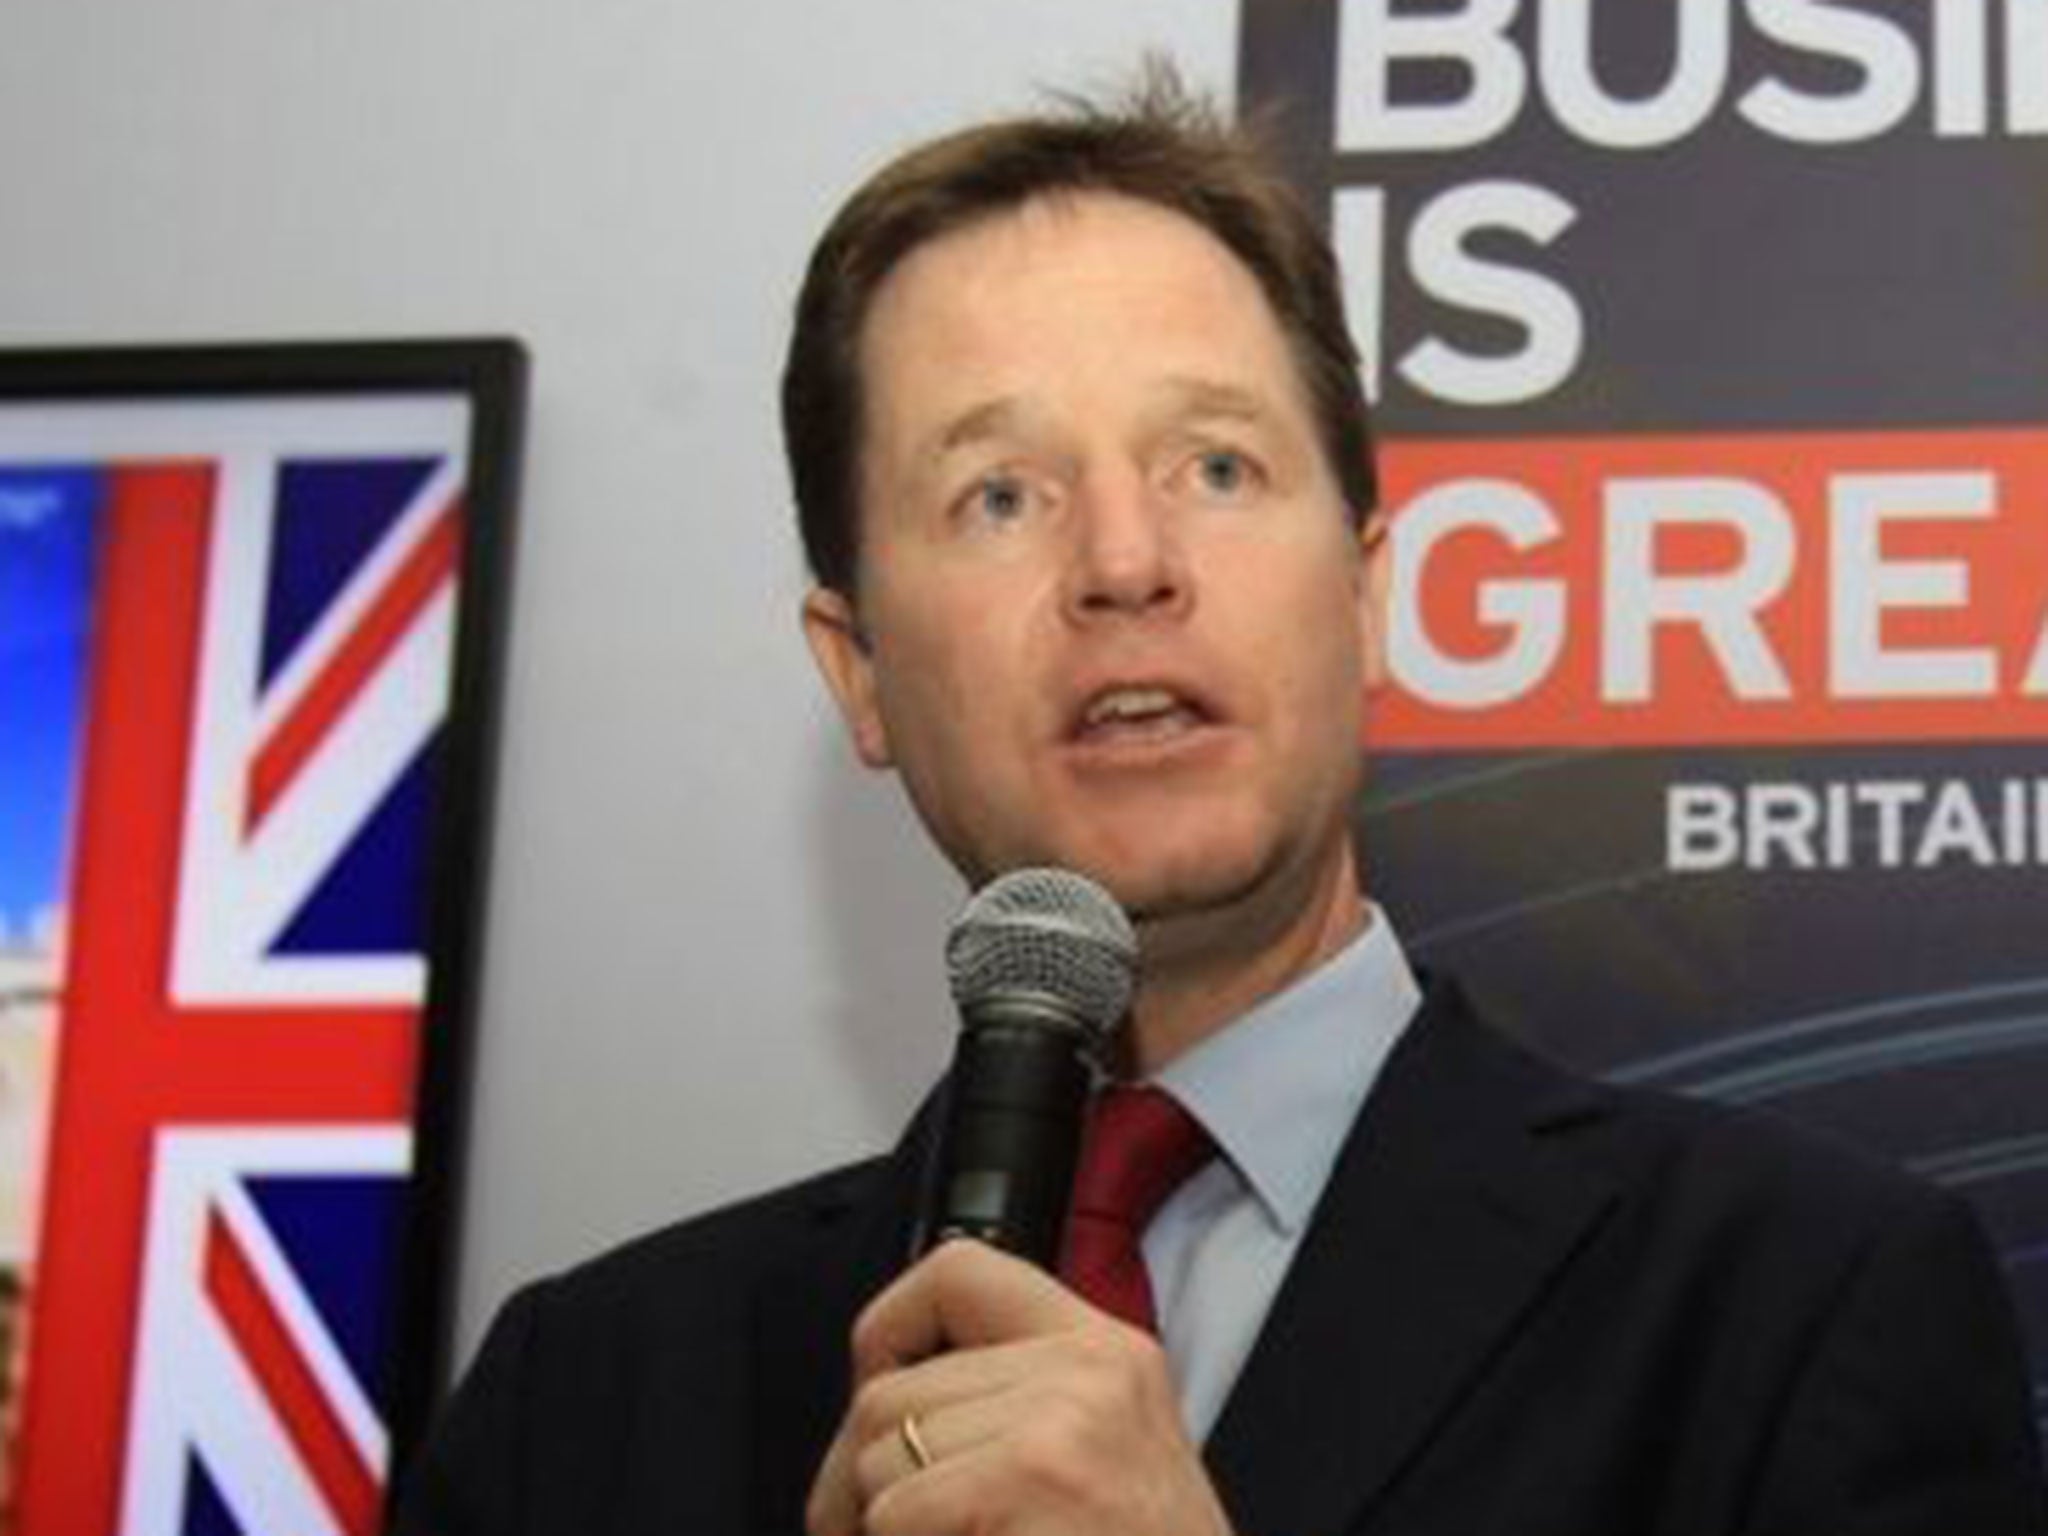 Nick Clegg is understood to have vetoed a 1.5% council tax cap this year over fears it could hit 'vital' services